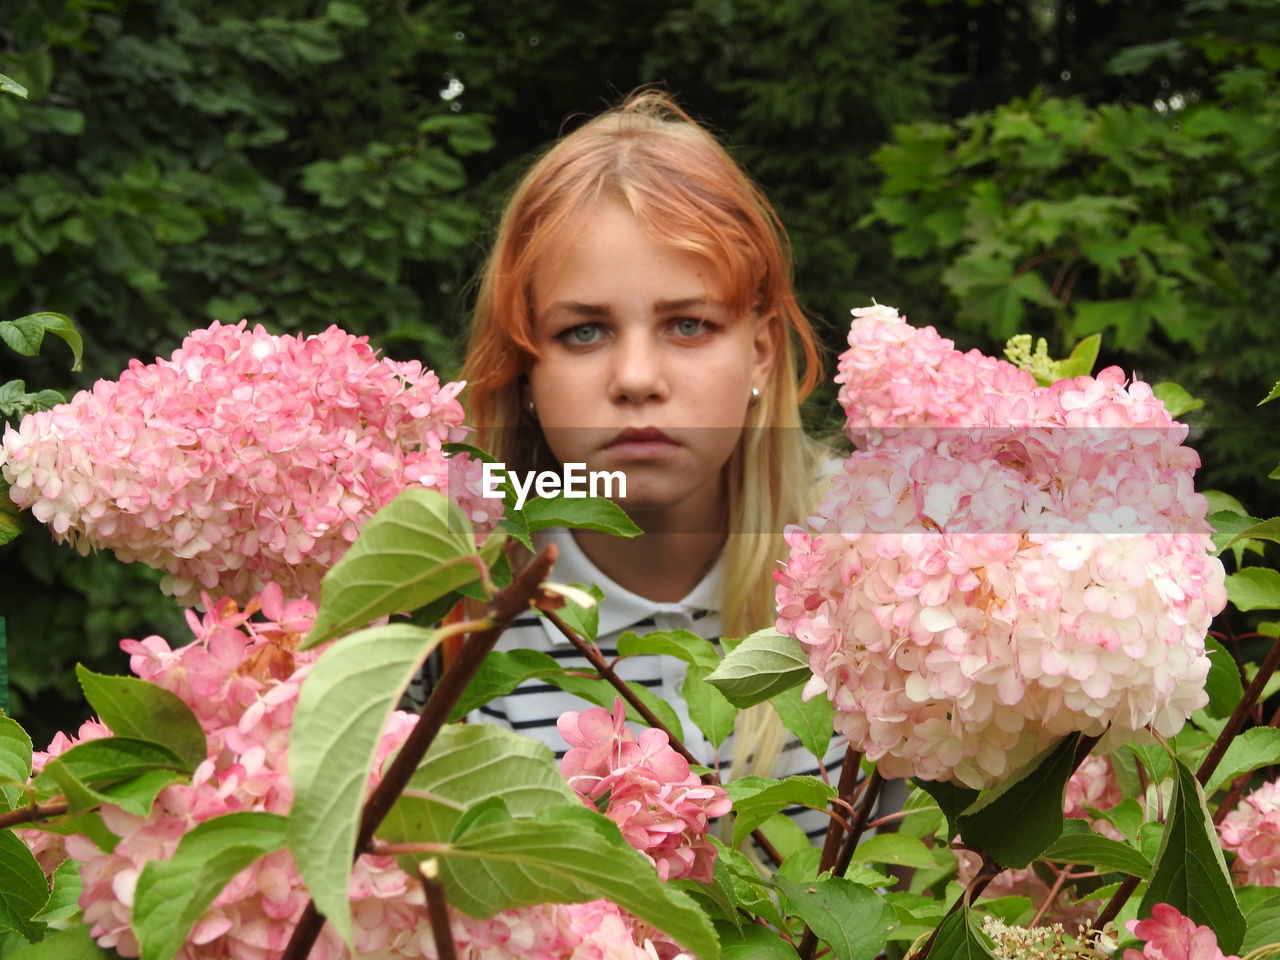 Portrait of girl by pink flowering plants